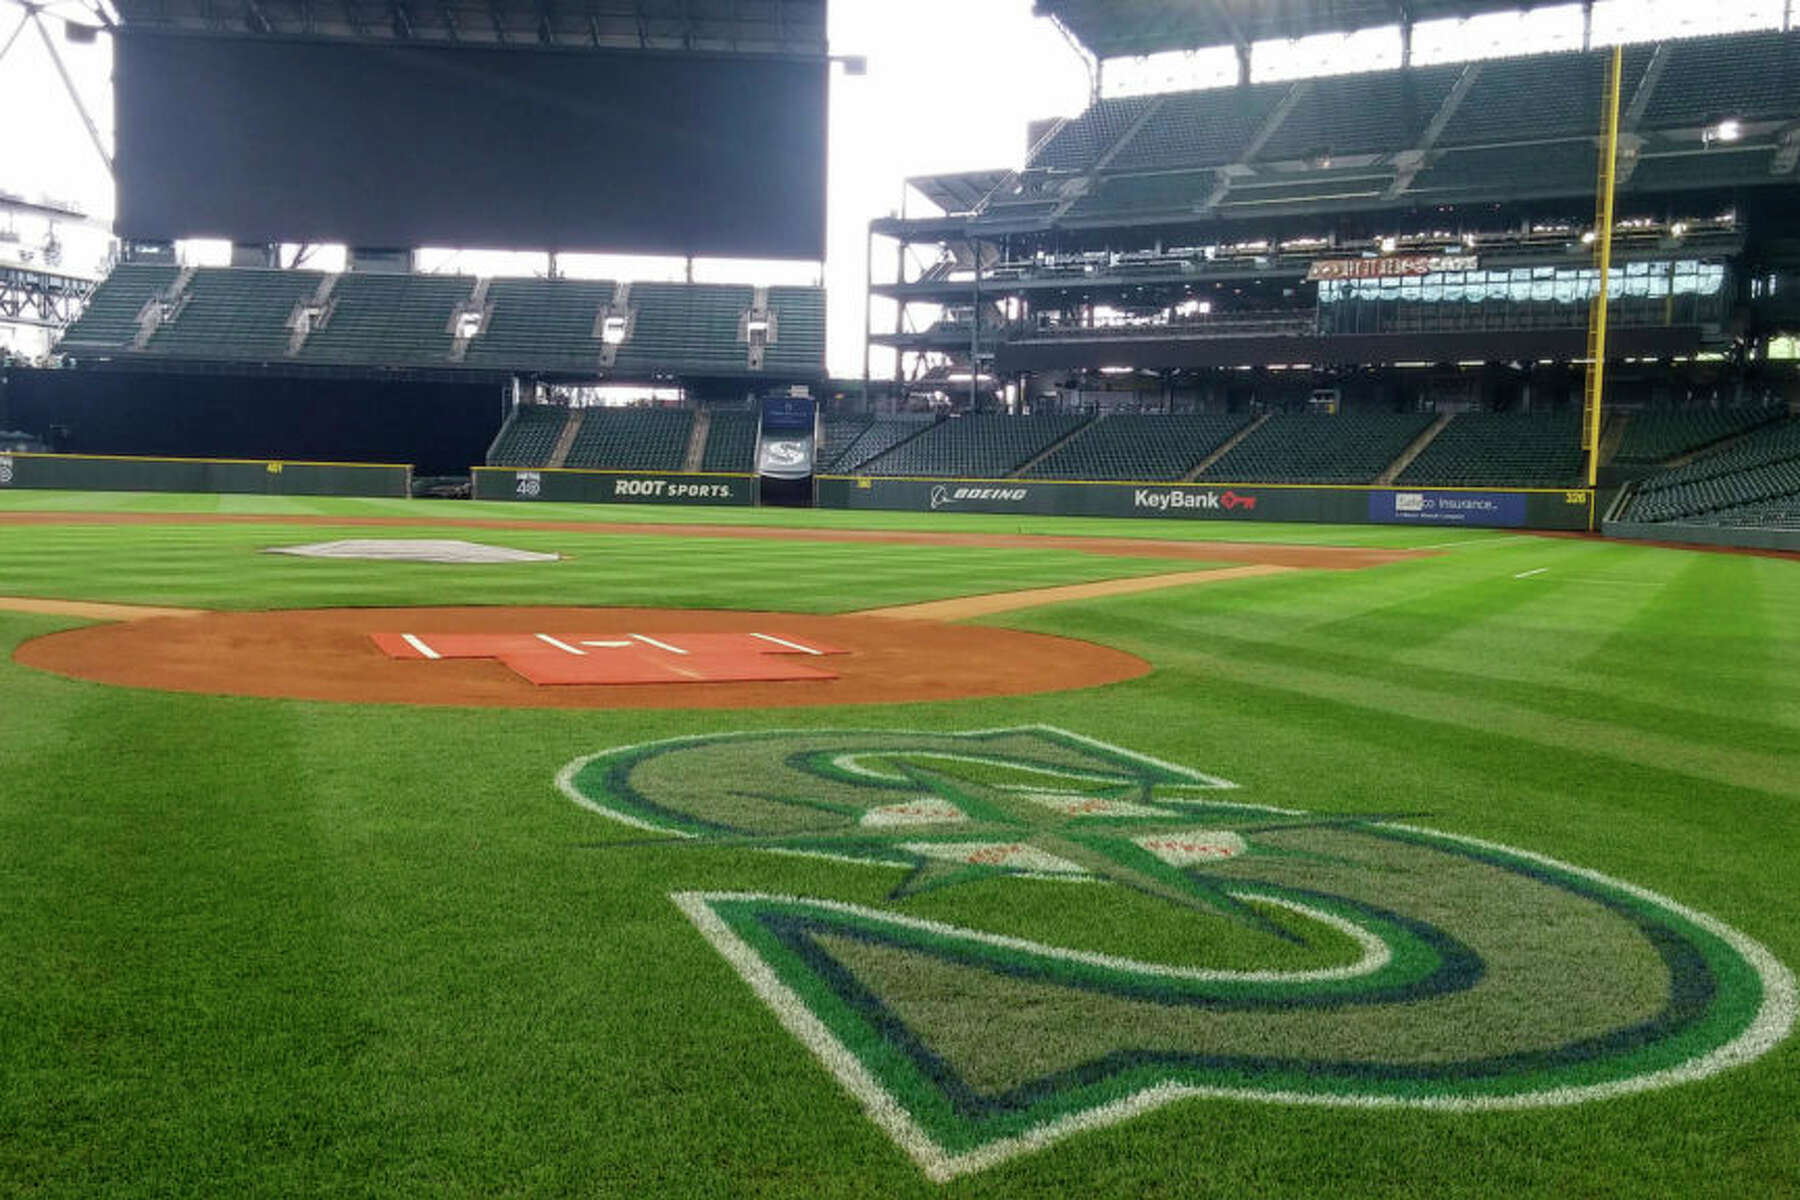 Mariners Install New Playing Surface at Safeco Field, by Mariners PR